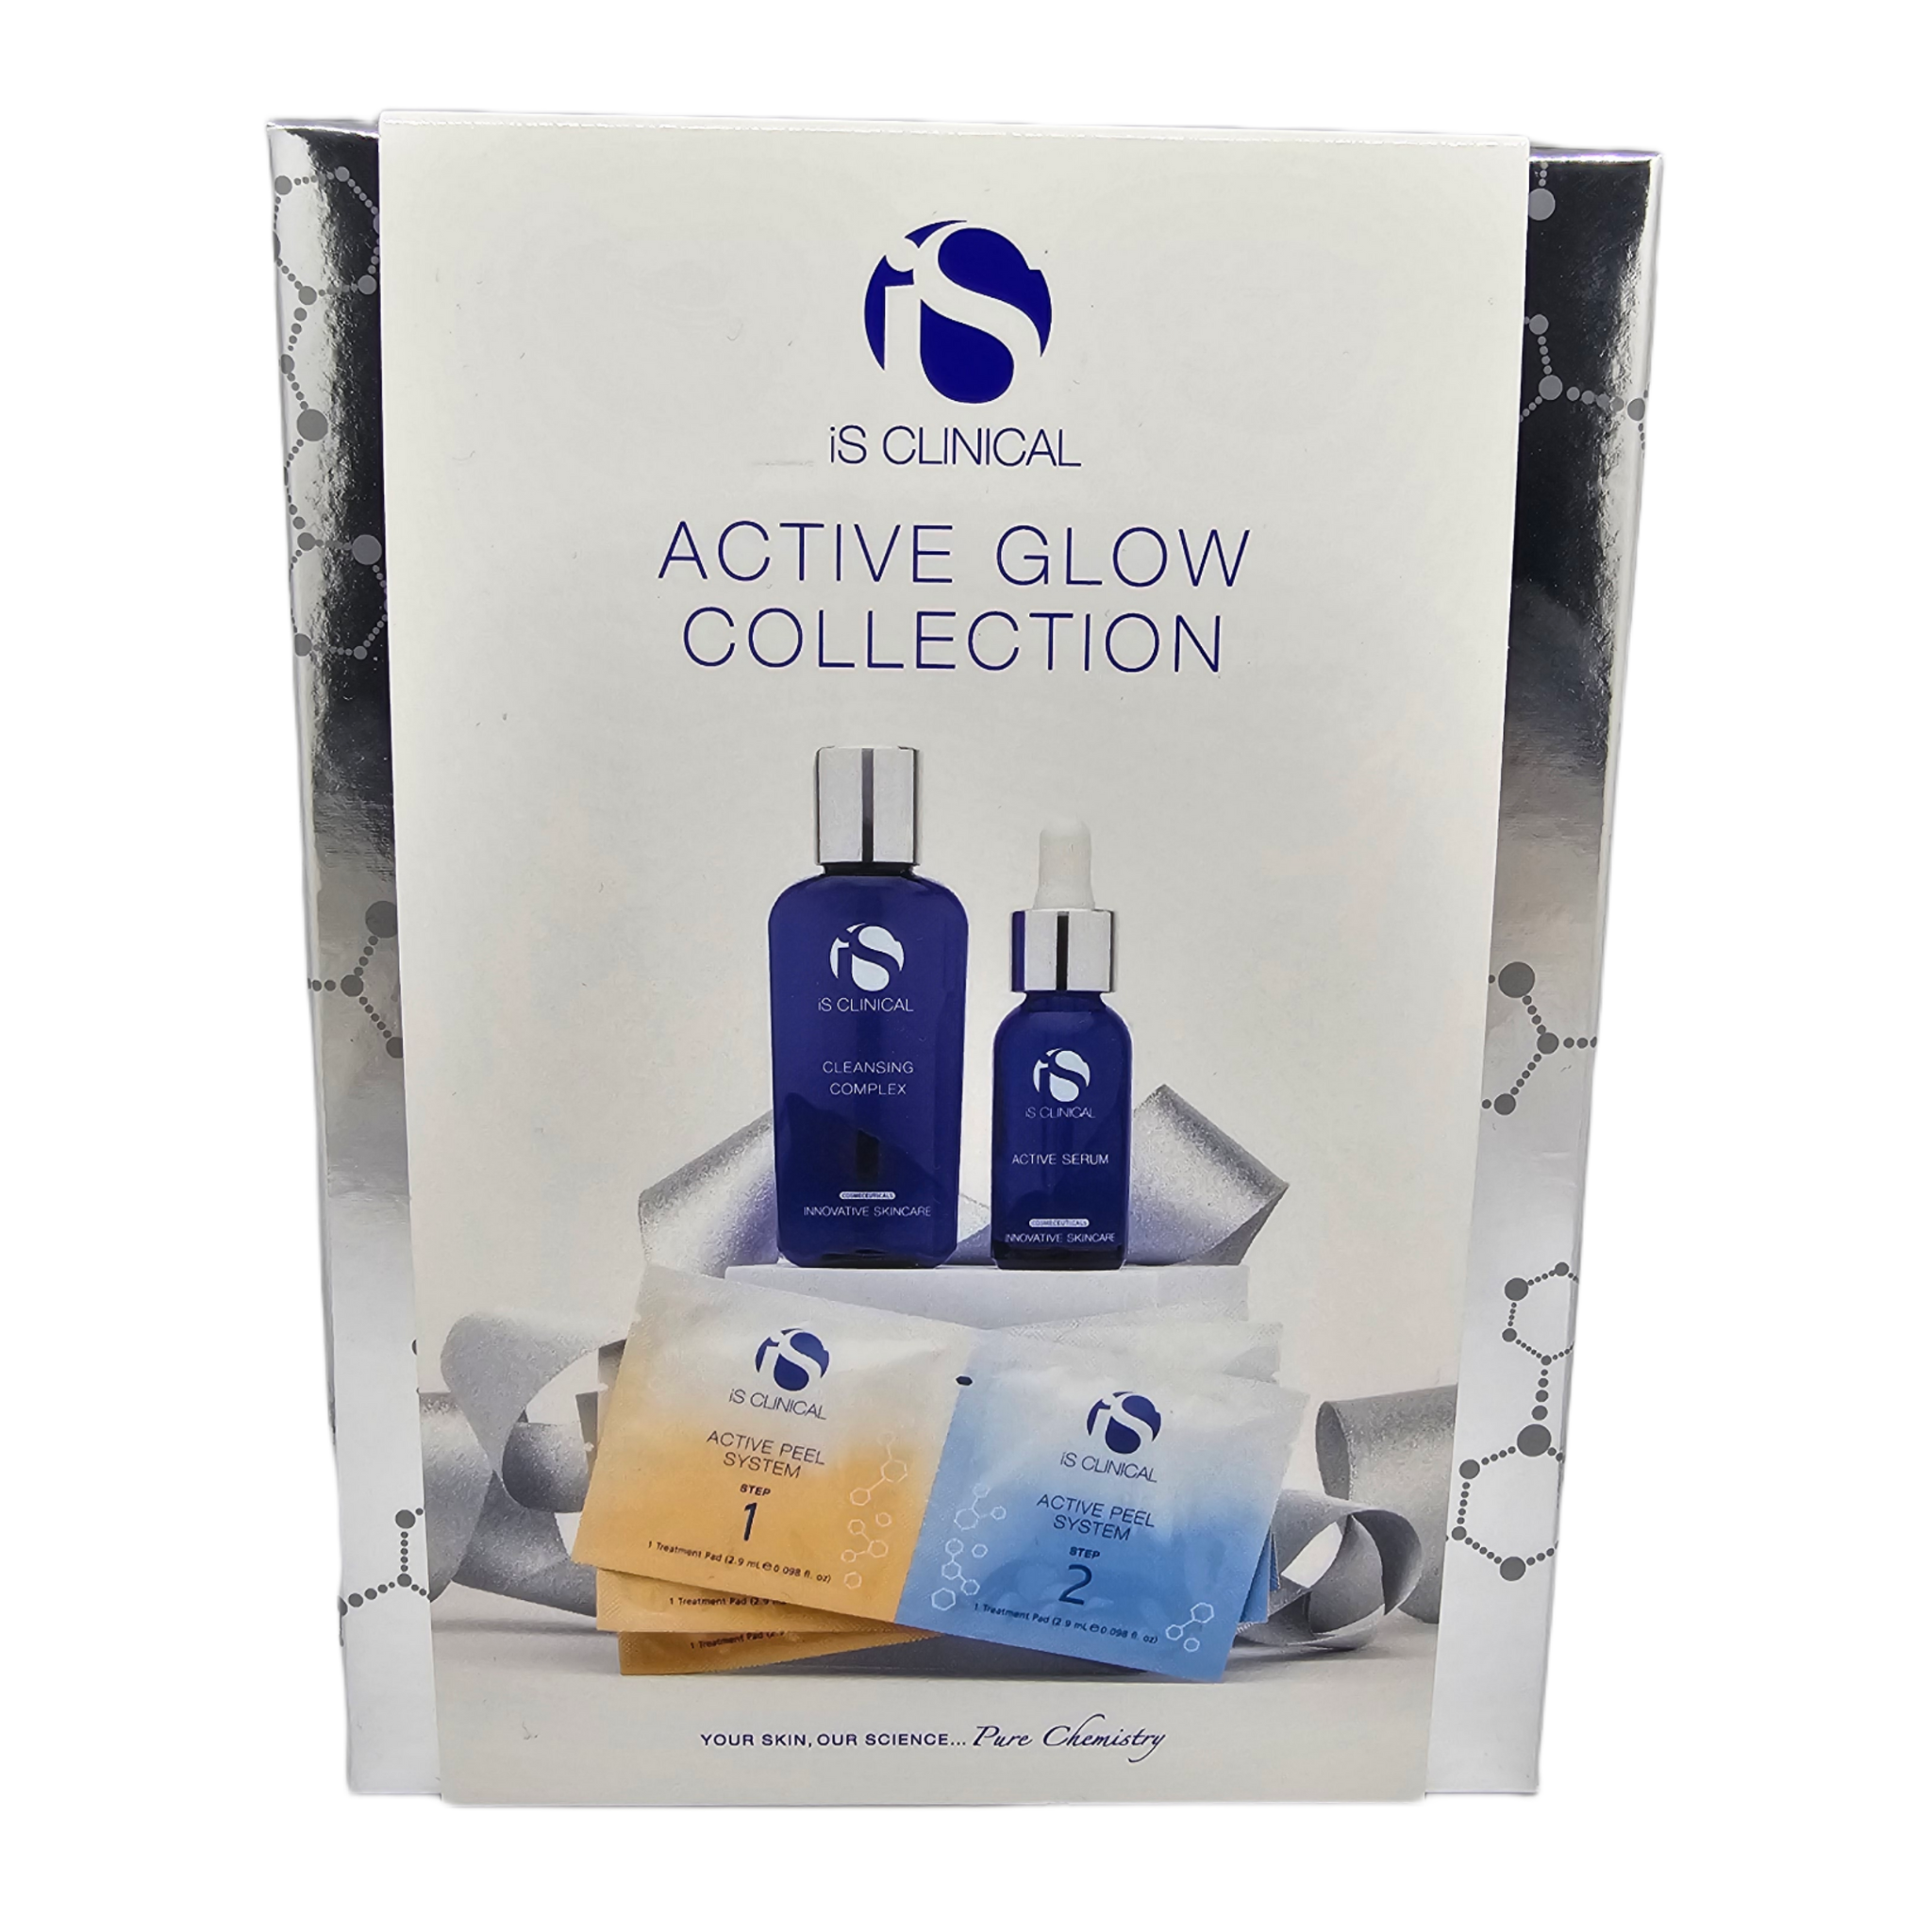 Active Glow Collection - iS Clinical